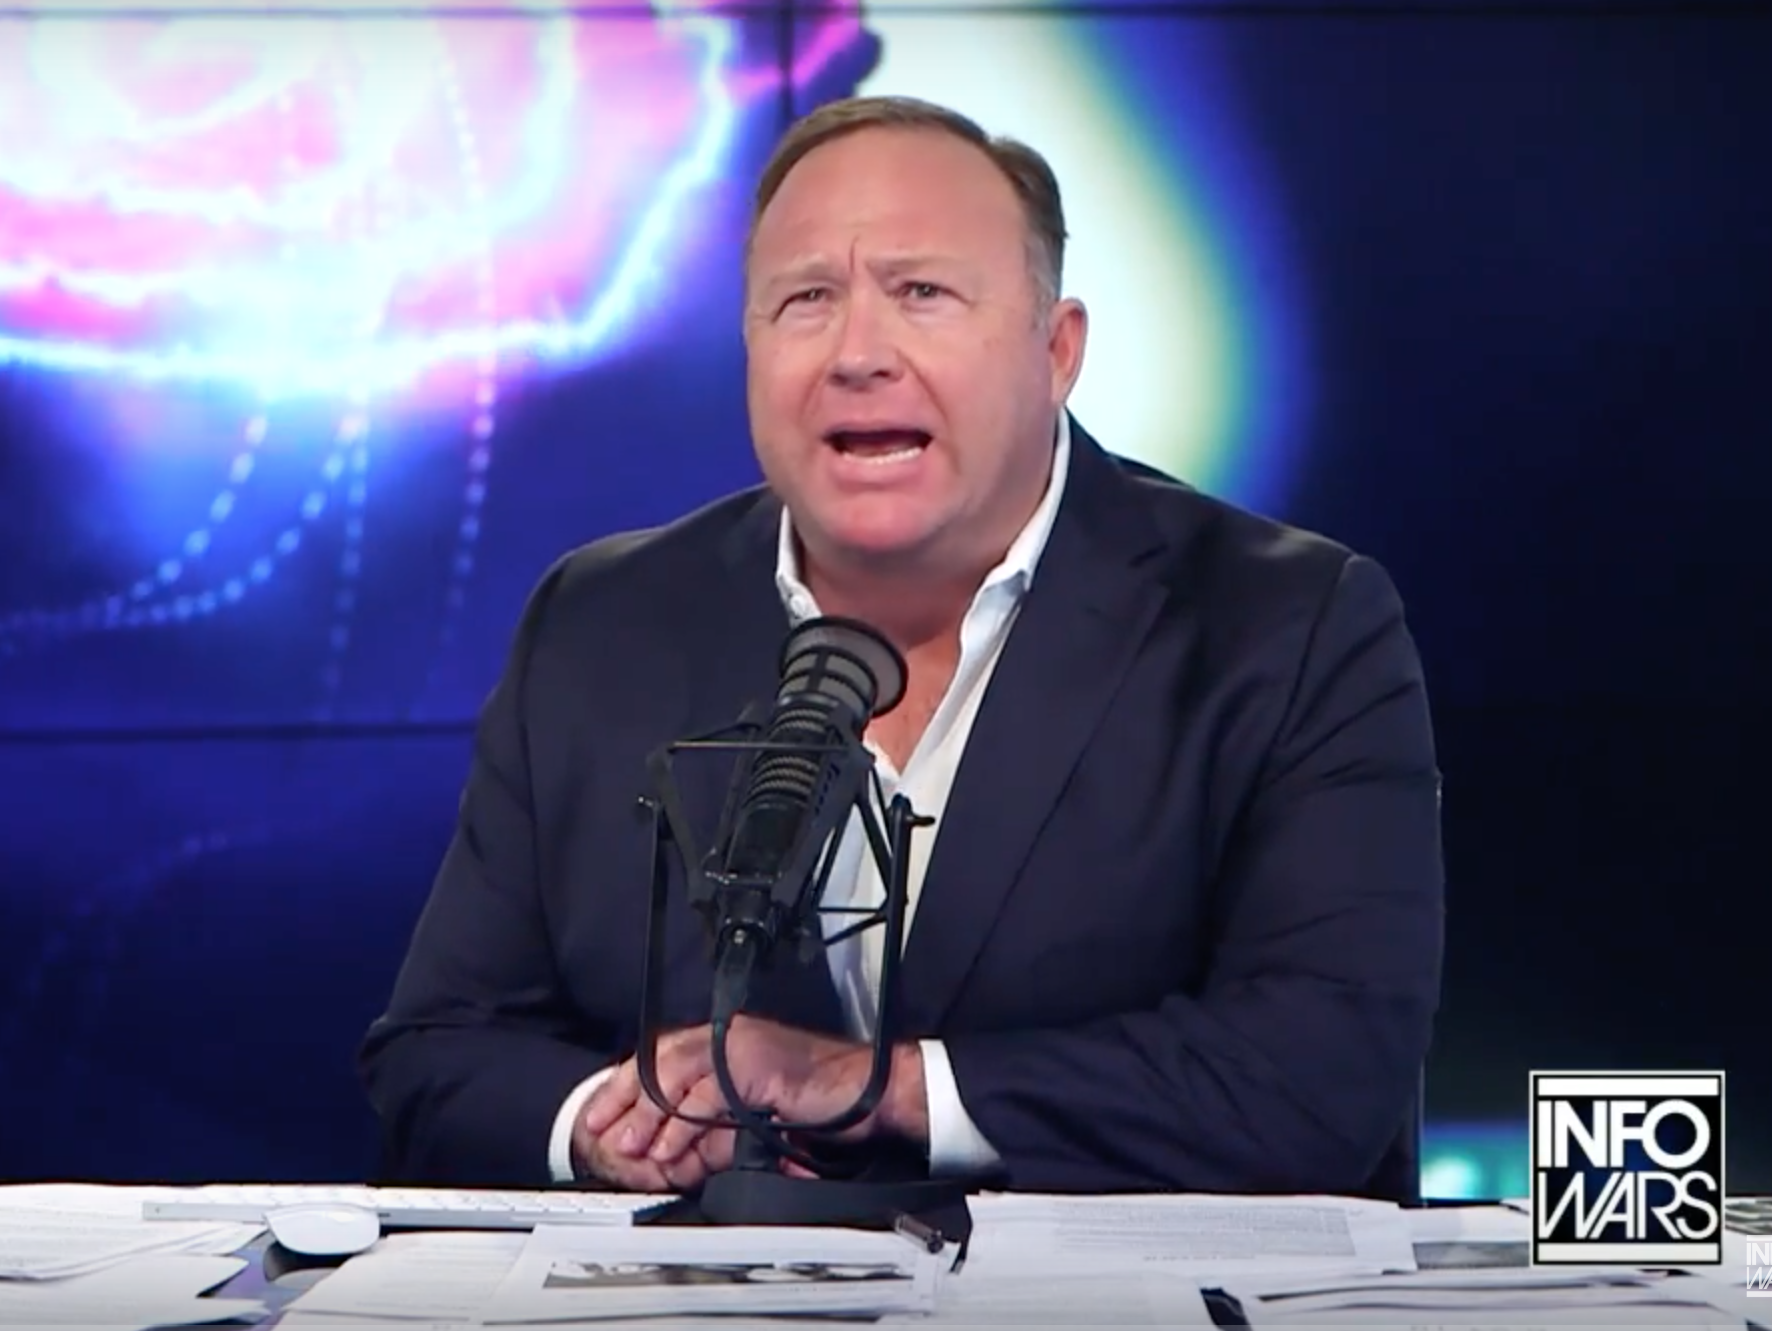 Apple removes Alex Jones Infowars podcasts from its podcast app in latest blow for controversial conspiracy theorist